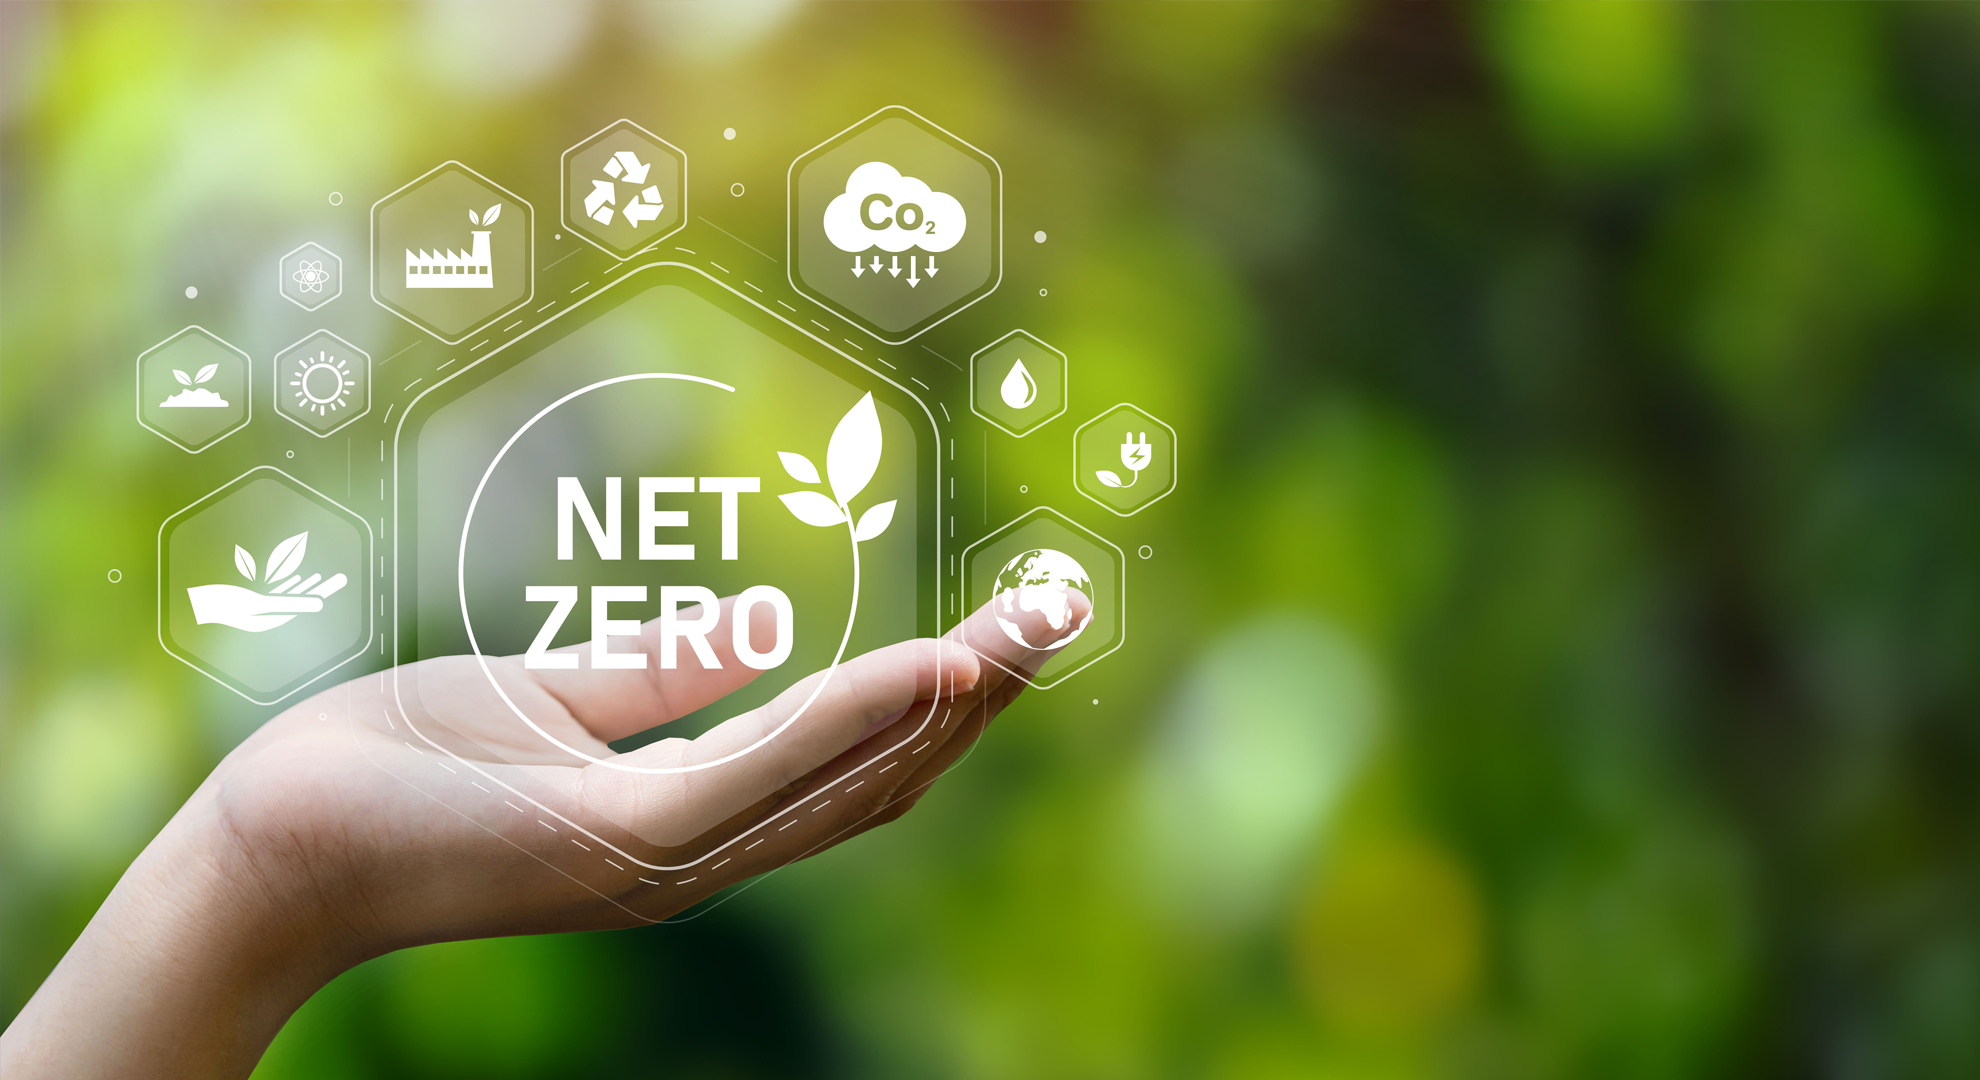 An open hand with an illustration of environmental symbols within it, along with the words 'Net Zero'